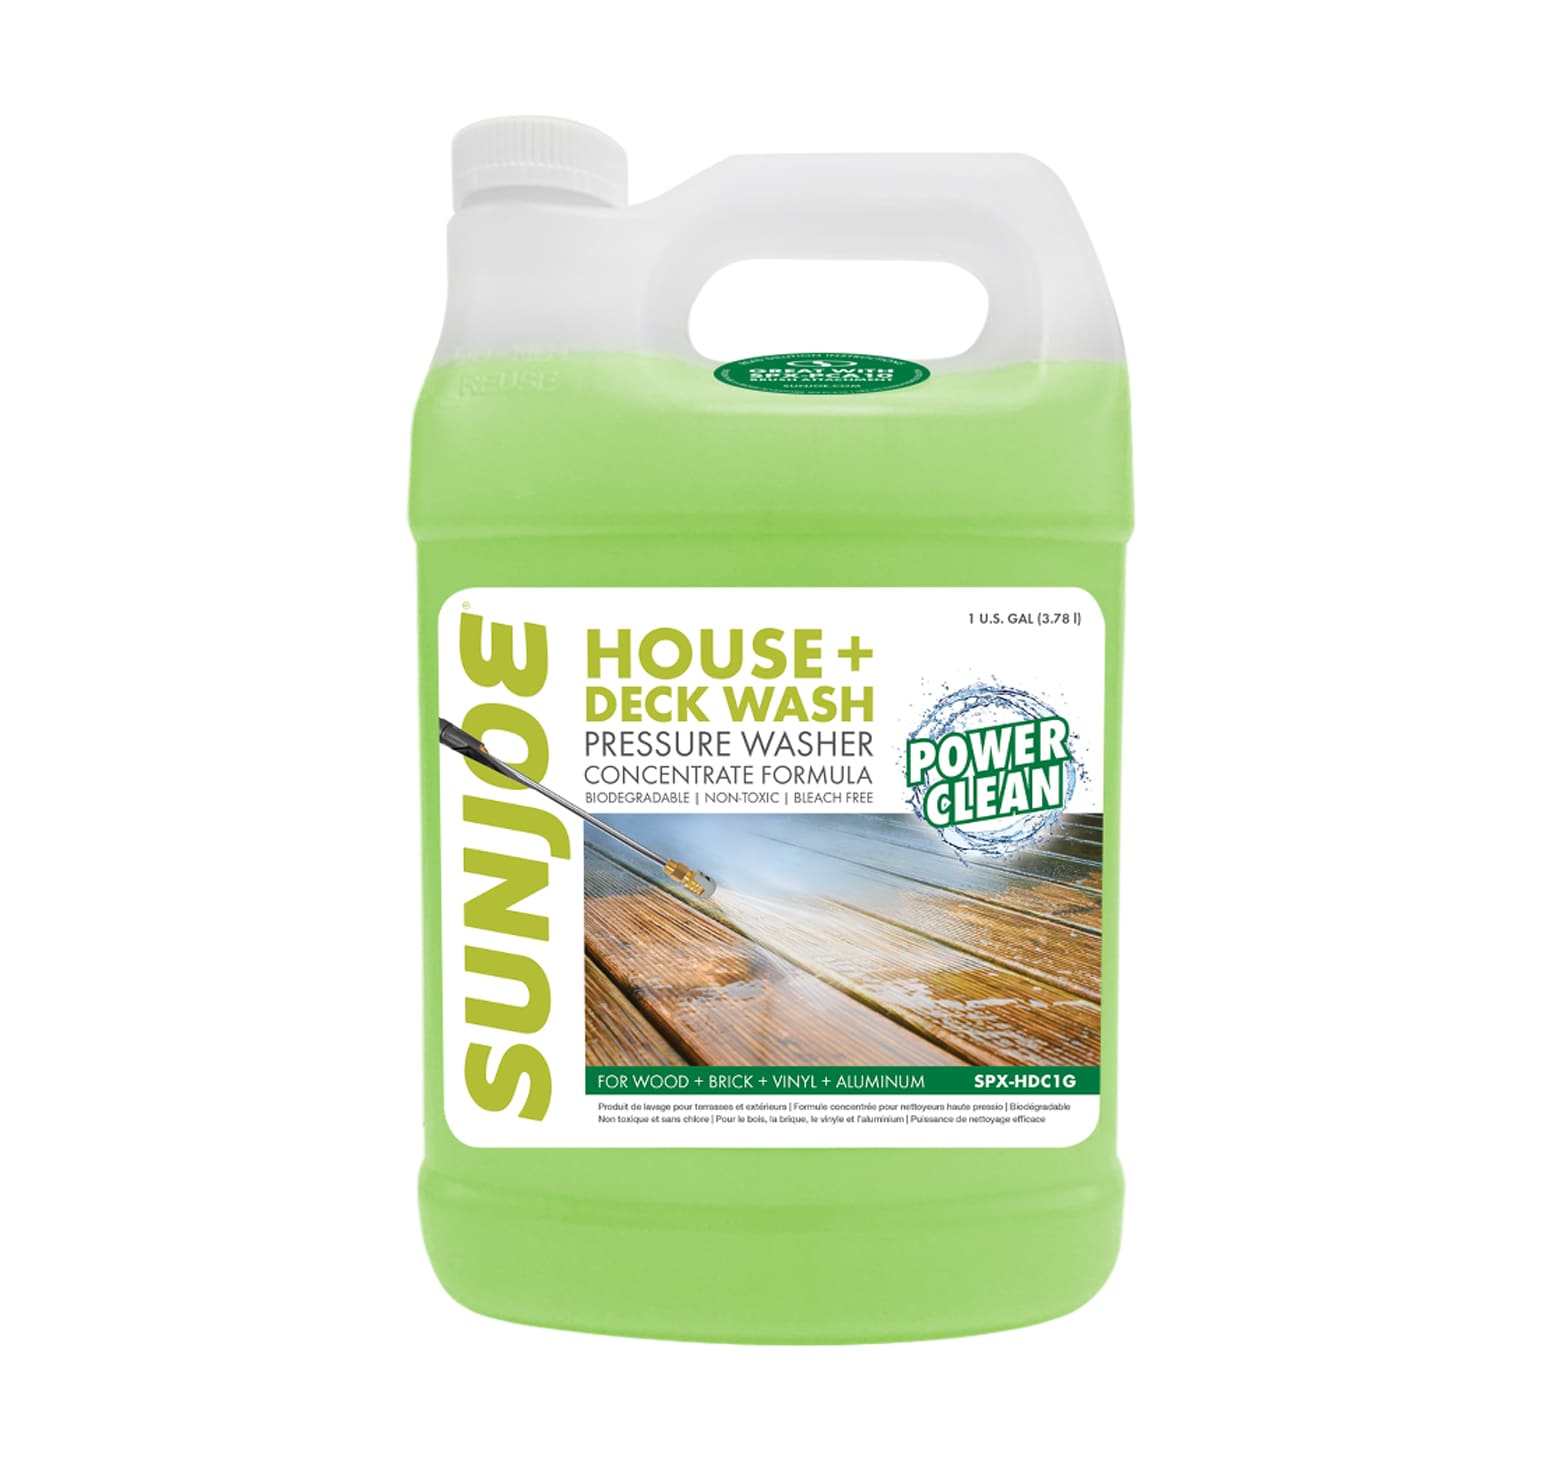 Slick Products Pressure Washer Foam Cannon, Scrub Brush, and Off-Road Wash  Super Concentrated Extra-Thick Soap Removes Heavy Dirt and Mud From Dirt